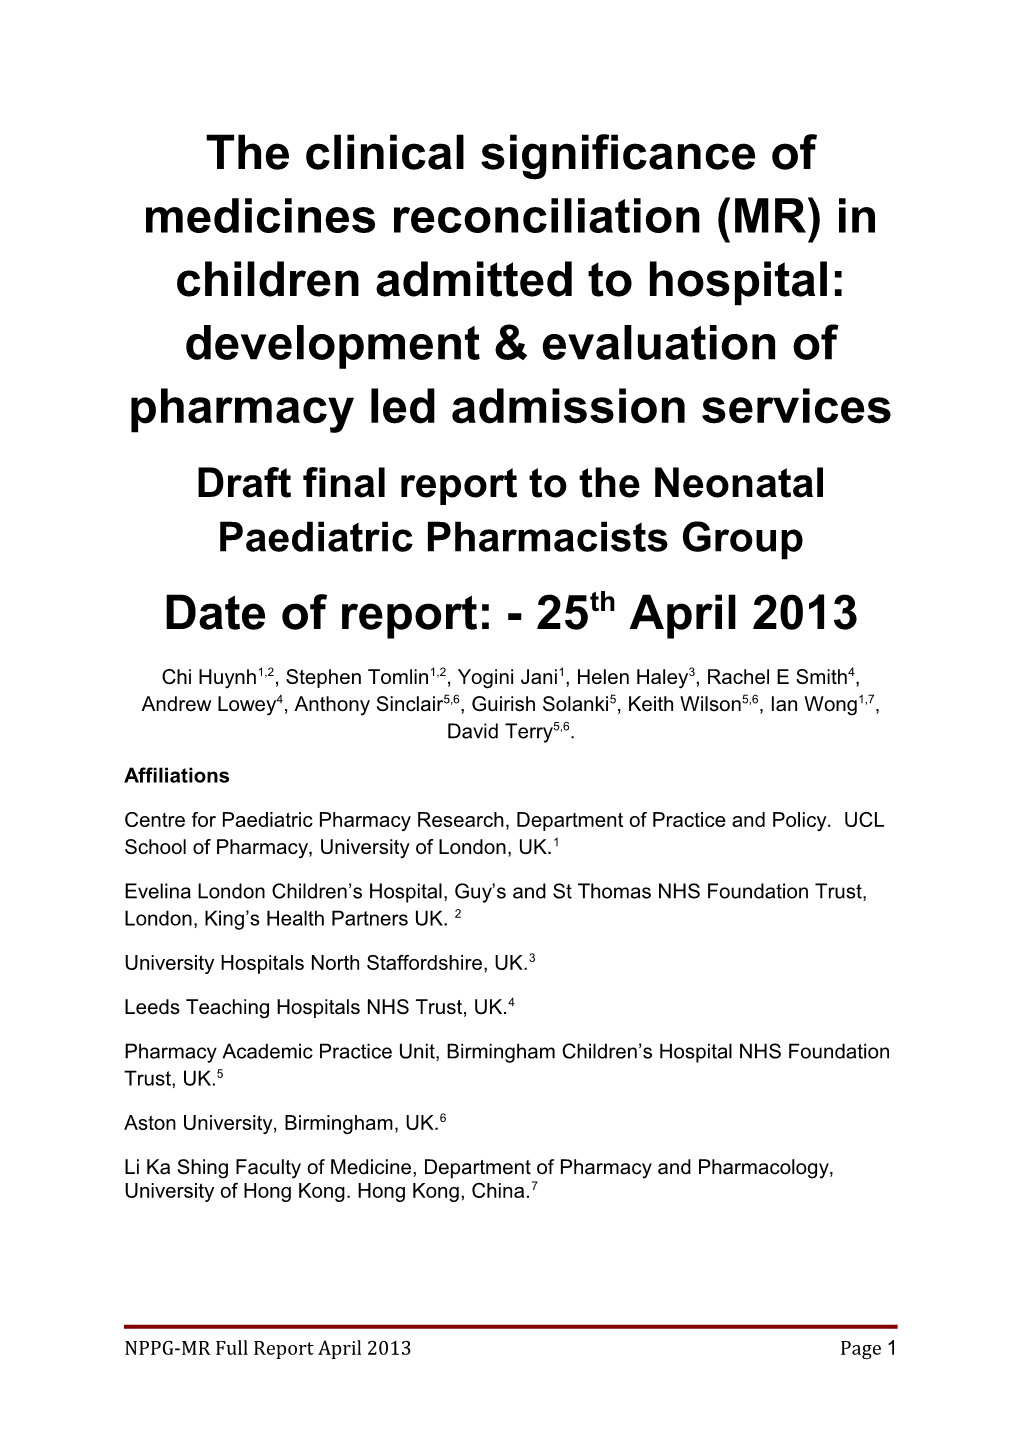 The Clinical Significance of Medicines Reconciliation (MR) in Children Admitted to Hospital